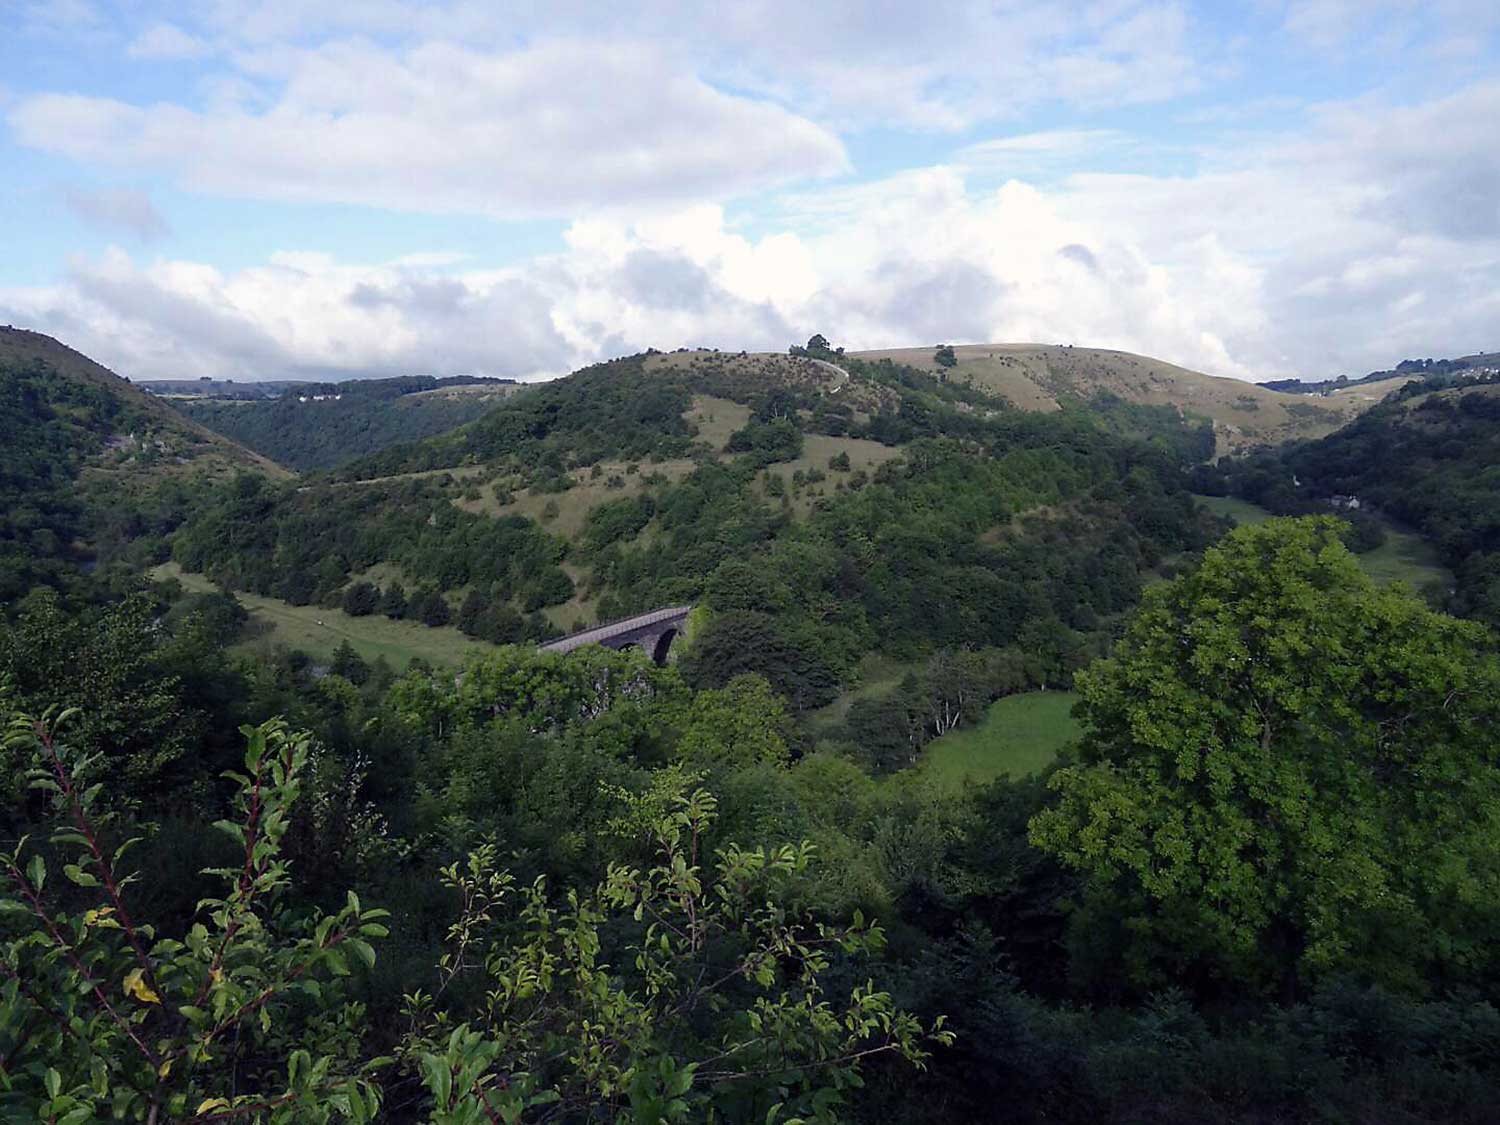 A view of Monsal Head during a walk on a sunny day